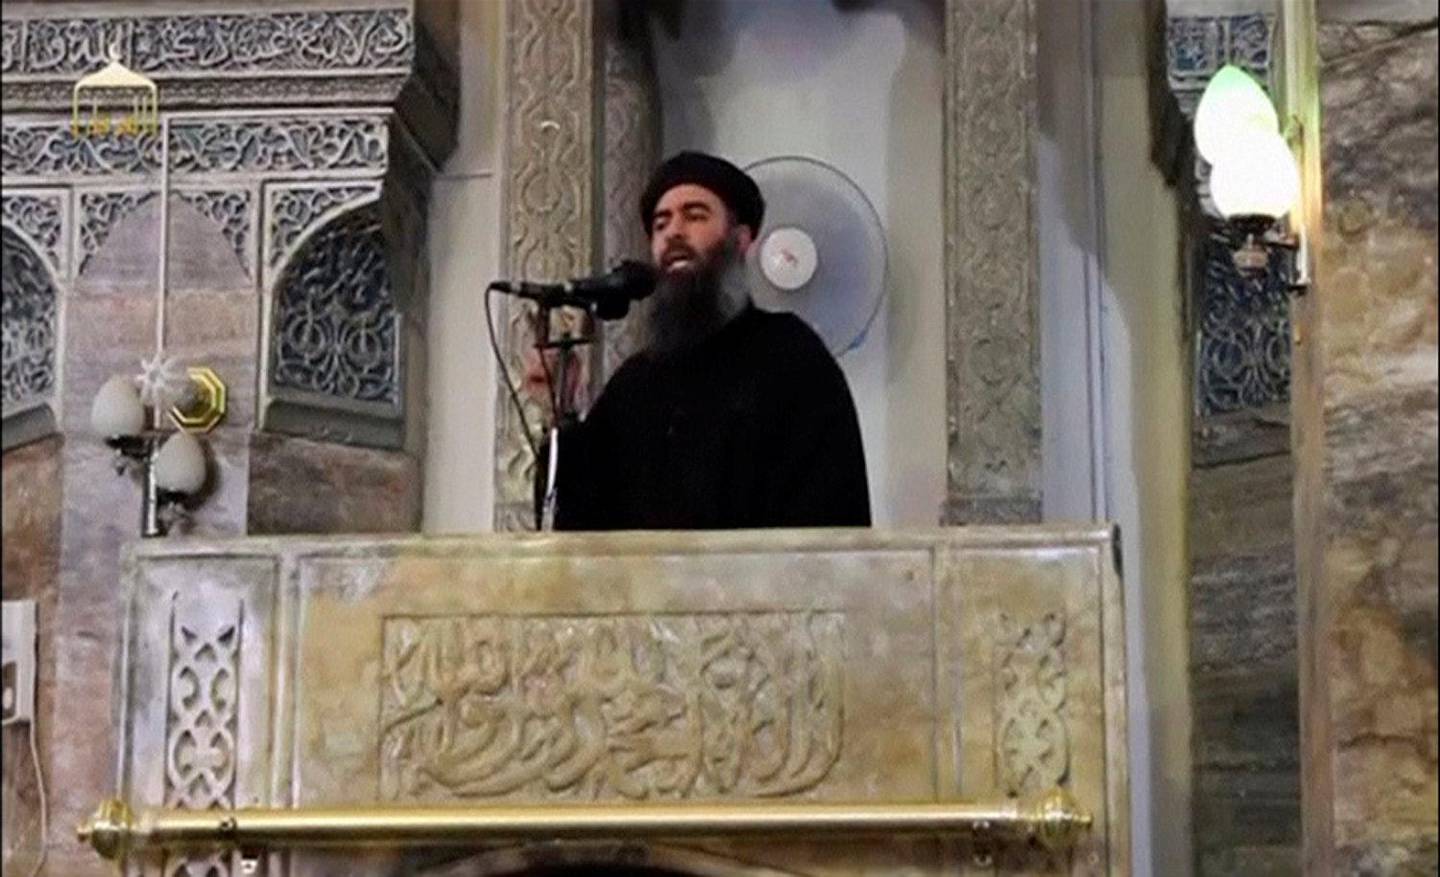 FILE PHOTO: A man purported to be the reclusive leader of the Islamic State militant group, Abu Bakr al-Baghdadi, speaks from the balcony of a mosque in Iraq's second city, Mosul, in this still image taken from a video posted on the Internet on July 5, 2014. REUTERS/Social Media Website via Reuters TV.   ATTENTION EDITORS - THIS IMAGE HAS BEEN SUPPLIED BY A THIRD PARTY. IT IS DISTRIBUTED, EXACTLY AS RECEIVED BY REUTERS, AS A SERVICE TO CLIENTS. REUTERS IS UNABLE TO INDEPENDENTLY VERIFY THE CONTENT OF THIS VIDEO, WHICH HAS BEEN OBTAINED FROM A SOCIAL MEDIA WEBSITE/File Photo